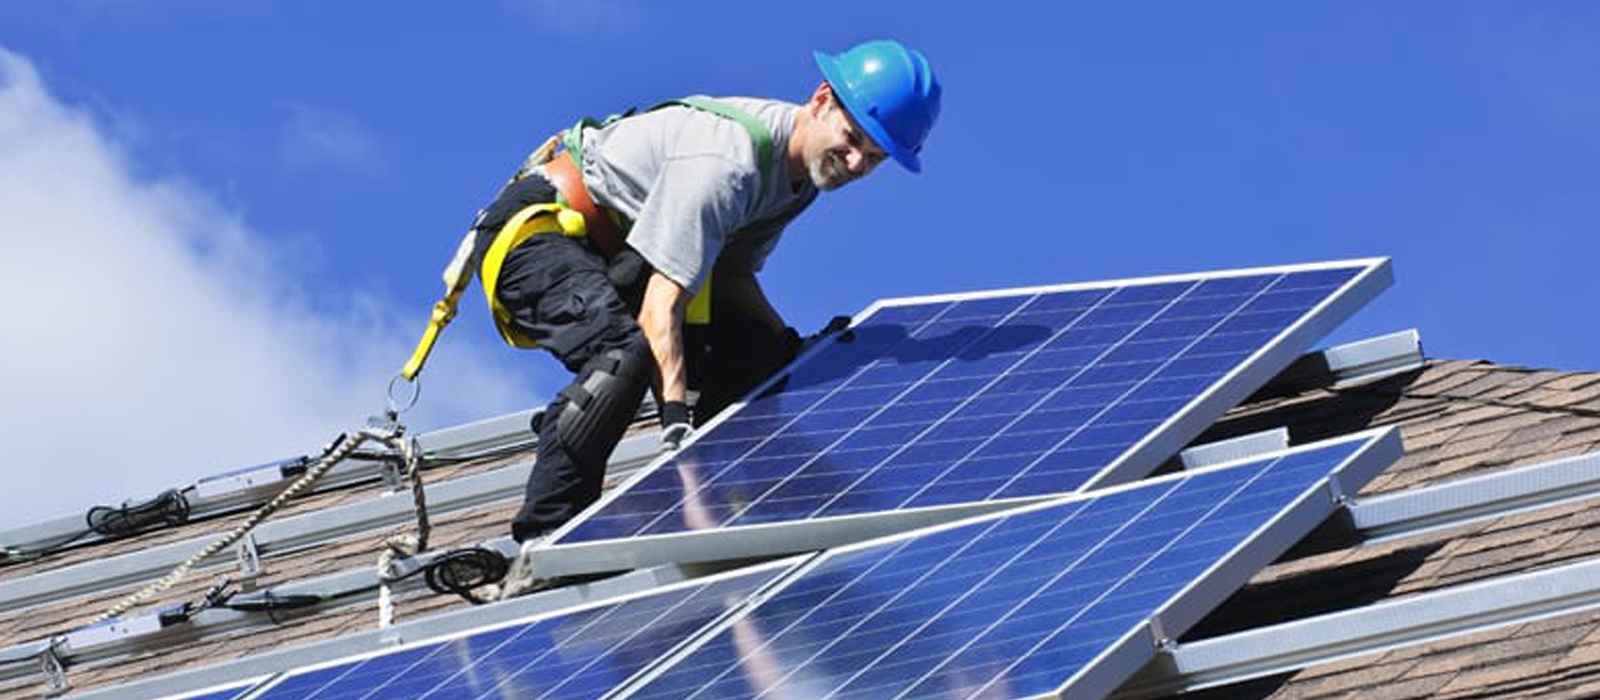 Certified Roof Replacement - Summit Roofing & Solar